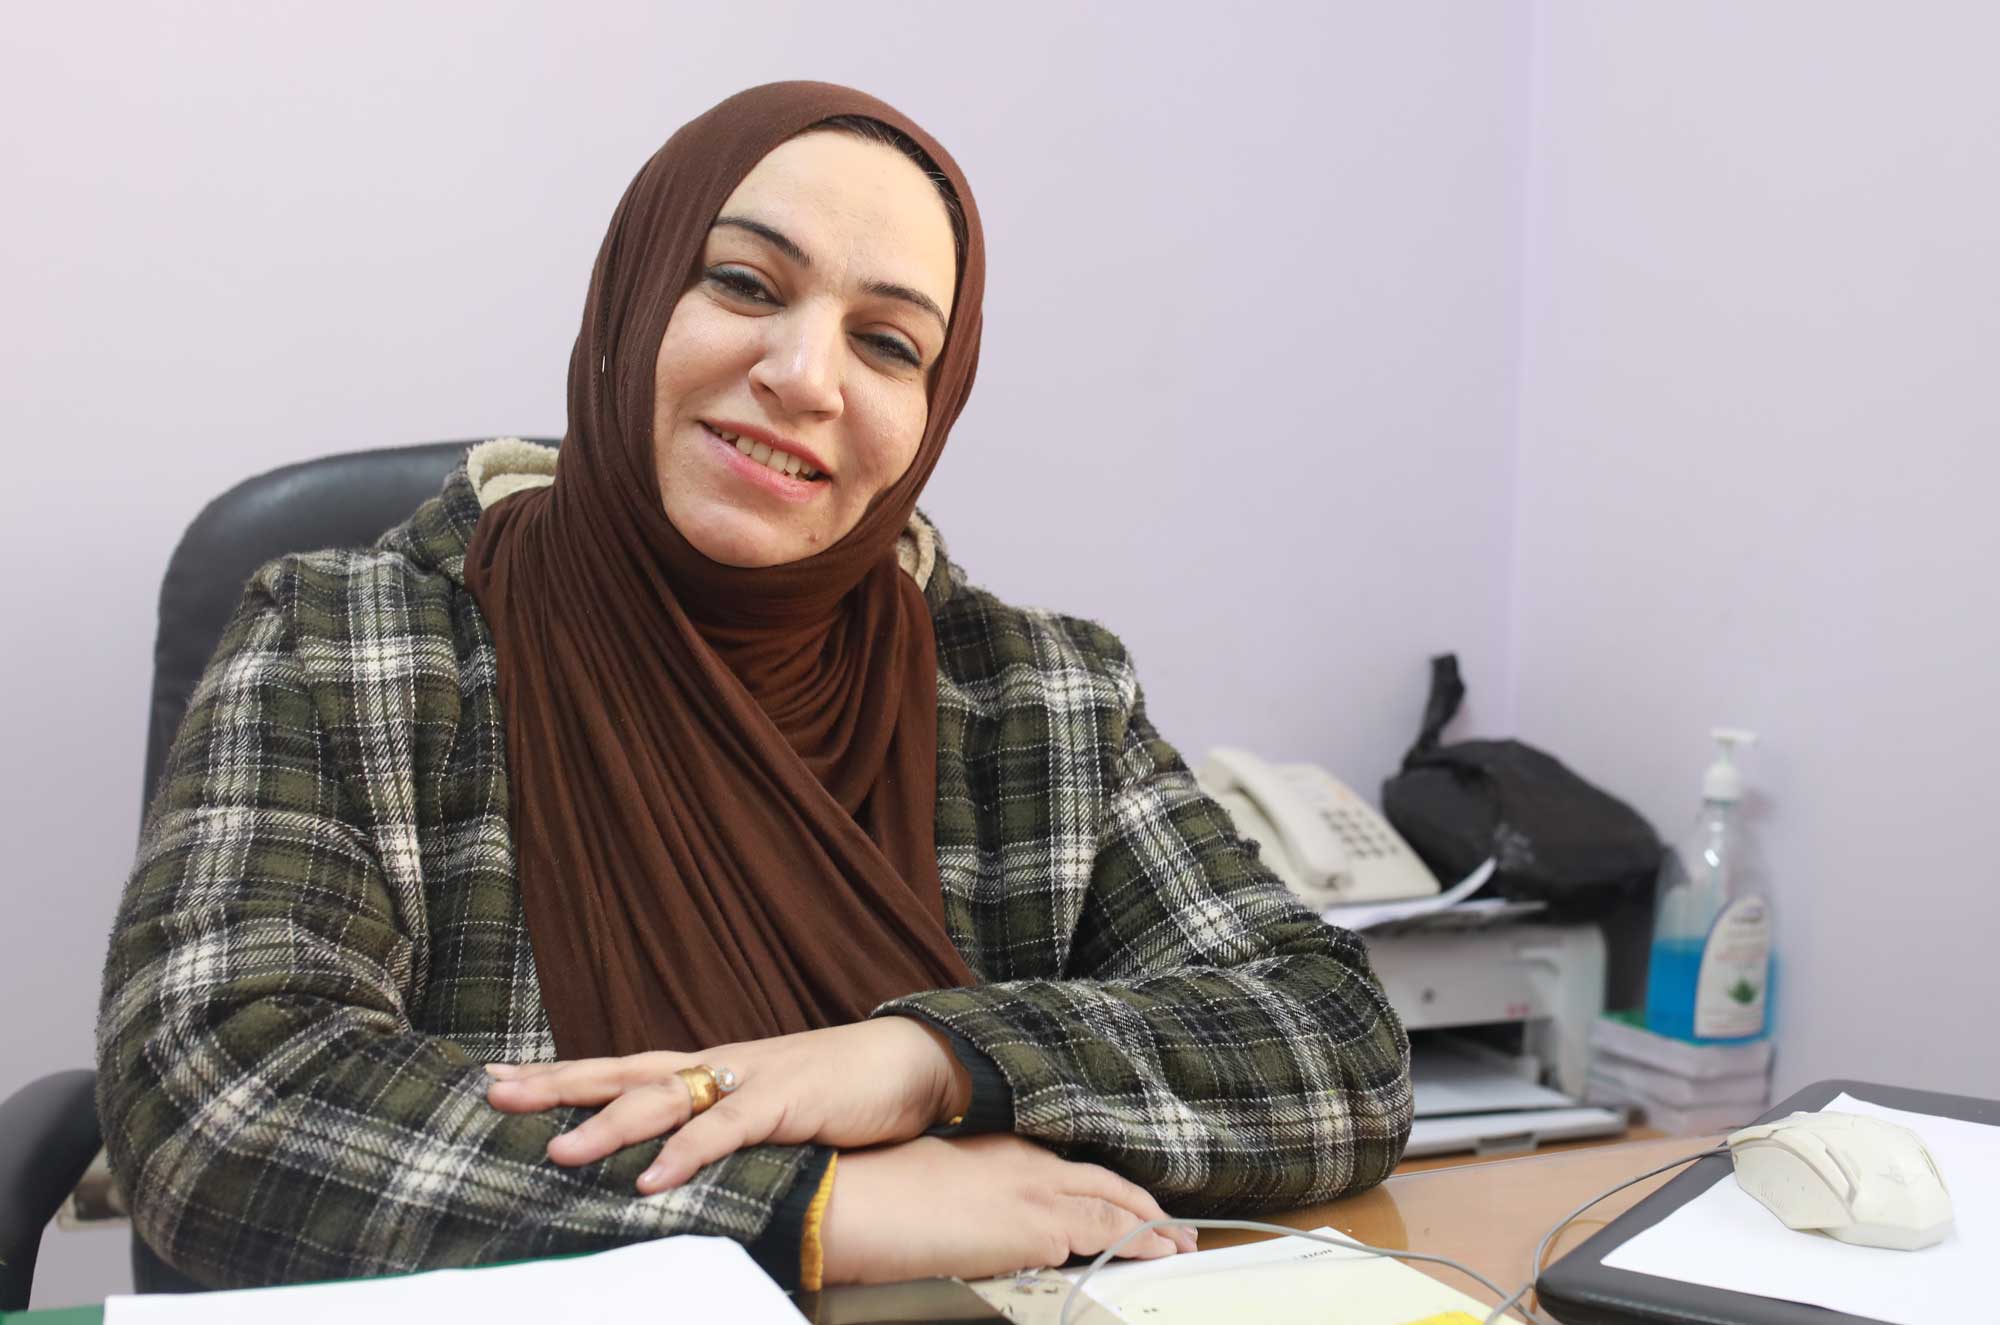 Soha Mosa sitting at her desk. She is a psychologist and therapist who works at the Women’s Health Centre in Jabaliya, Gaza.